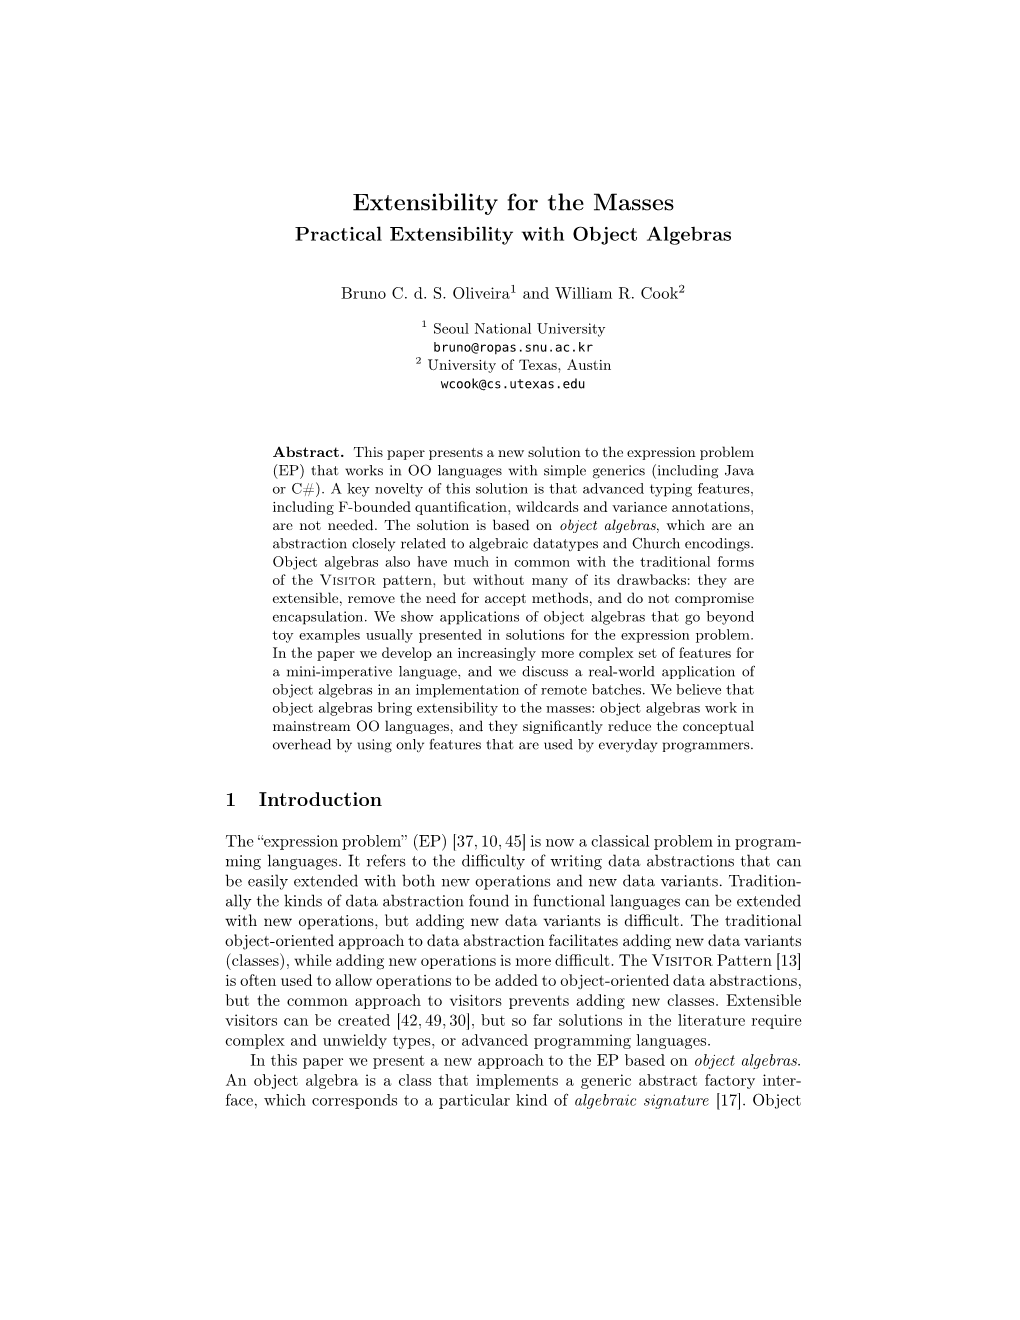 Extensibility for the Masses Practical Extensibility with Object Algebras